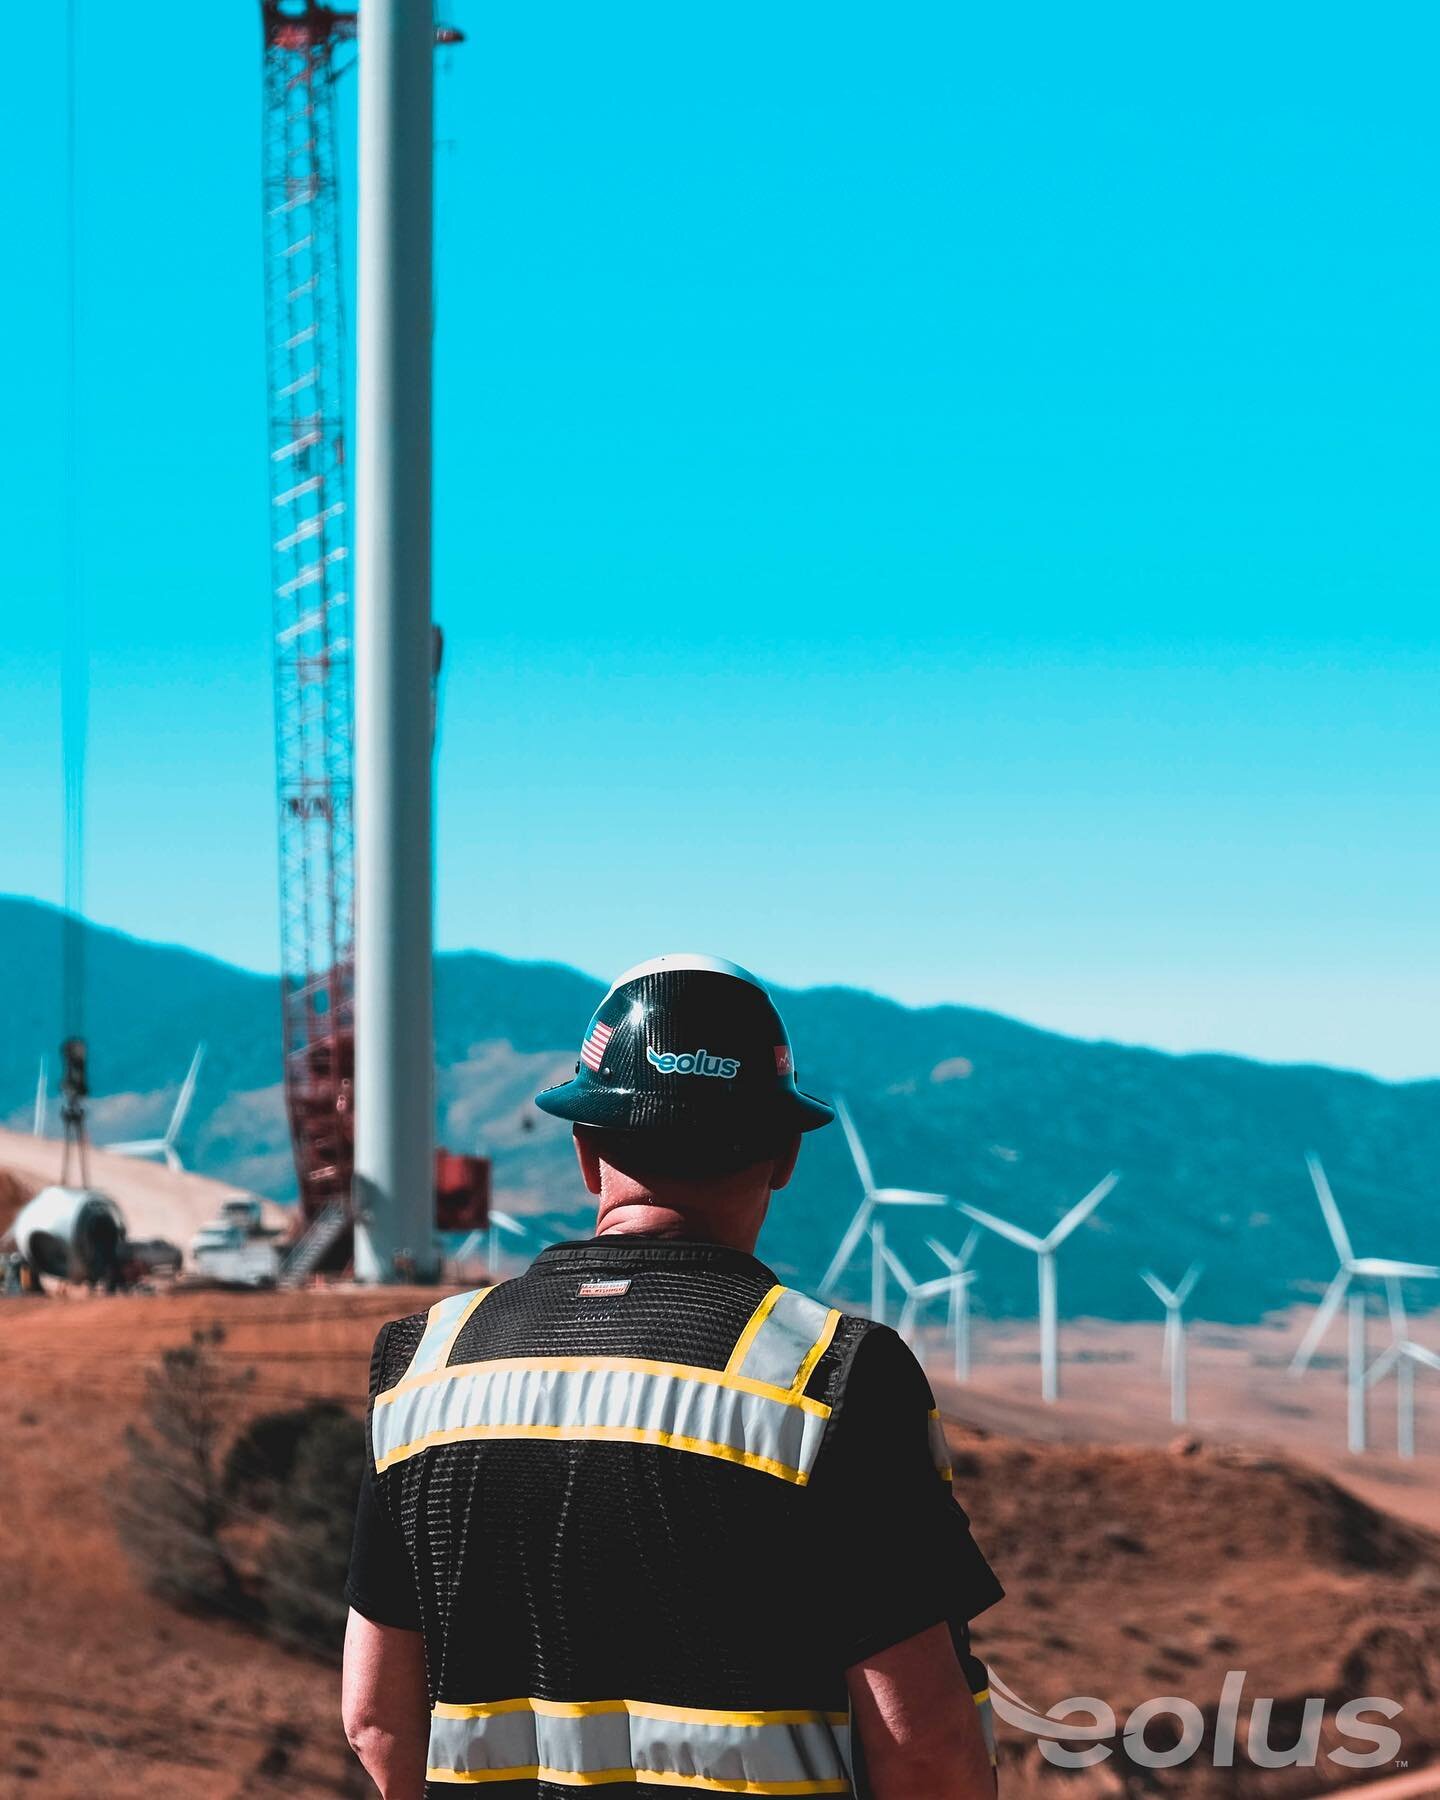 Ensuring a safe working environment is our top priority. Do you know the on-site safety essentials? Hard hats and reflective safety vests of course!
#WindWall1 #windenergy #windpower #windturbines #windturbine #wind #renewableenergy #renewables #clea